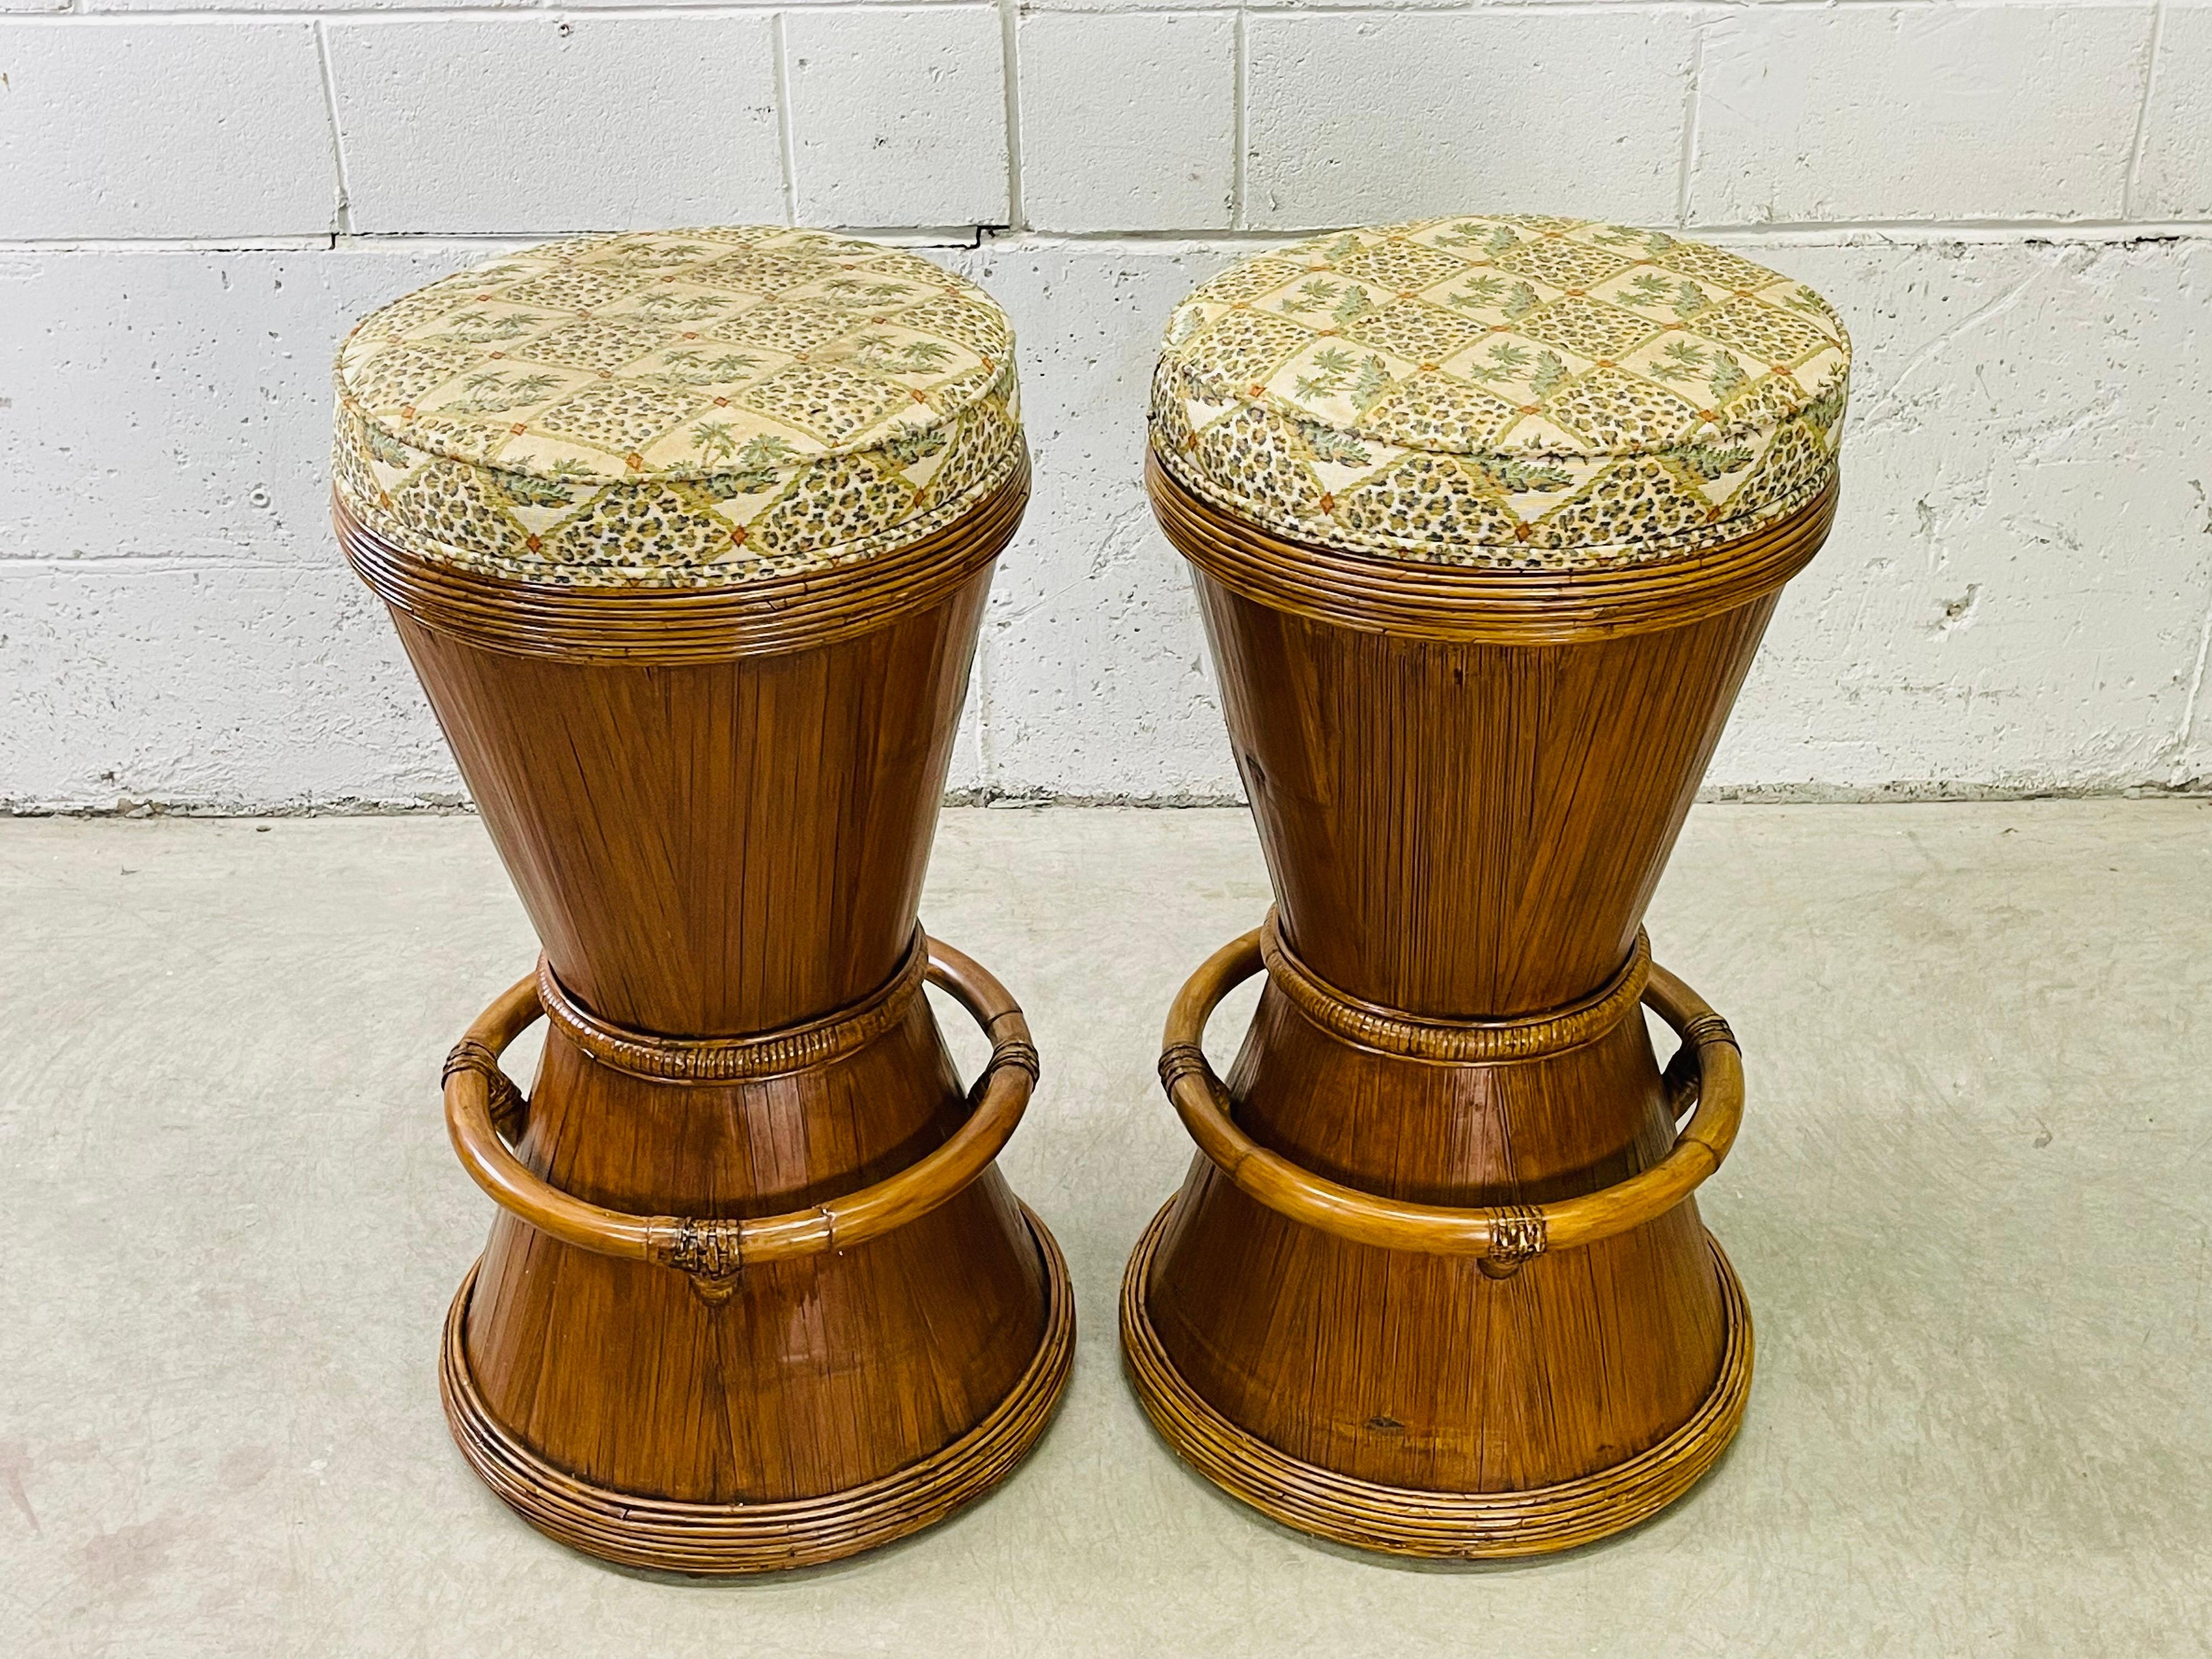 Vintage 1970s pair of tall round drum style rattan bar stools with original fabric seats. The stools have a round accented foot rest which is 11.5” H. No marks.